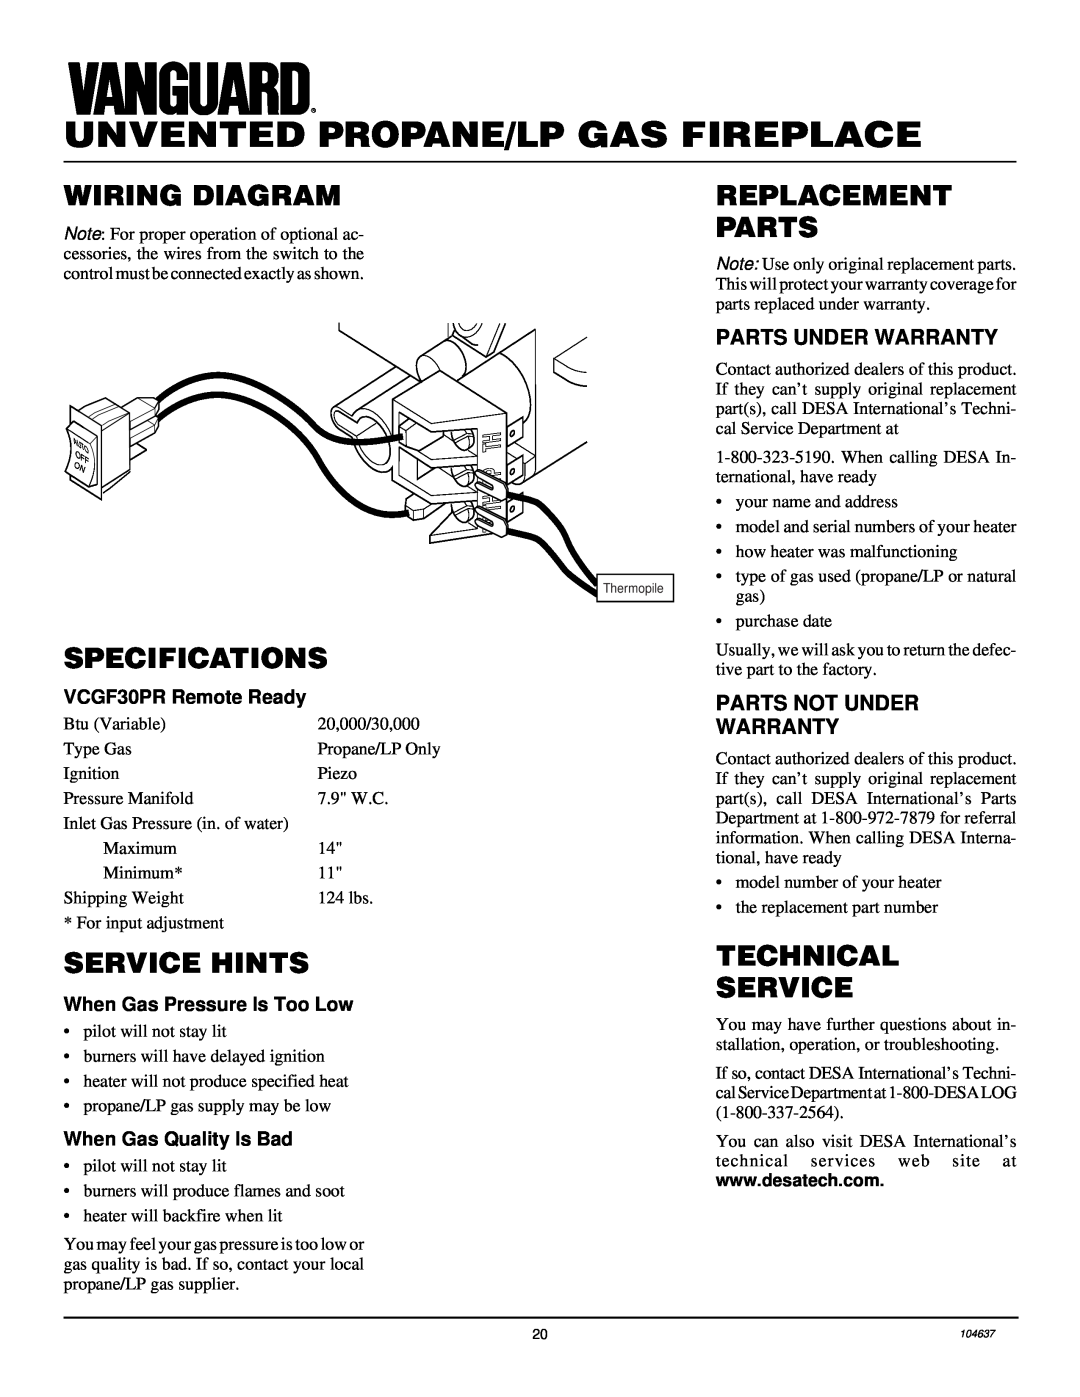 Desa VCGF30PR Wiring Diagram, Replacement Parts, Specifications, Service Hints, Technical Service, Parts Under Warranty 